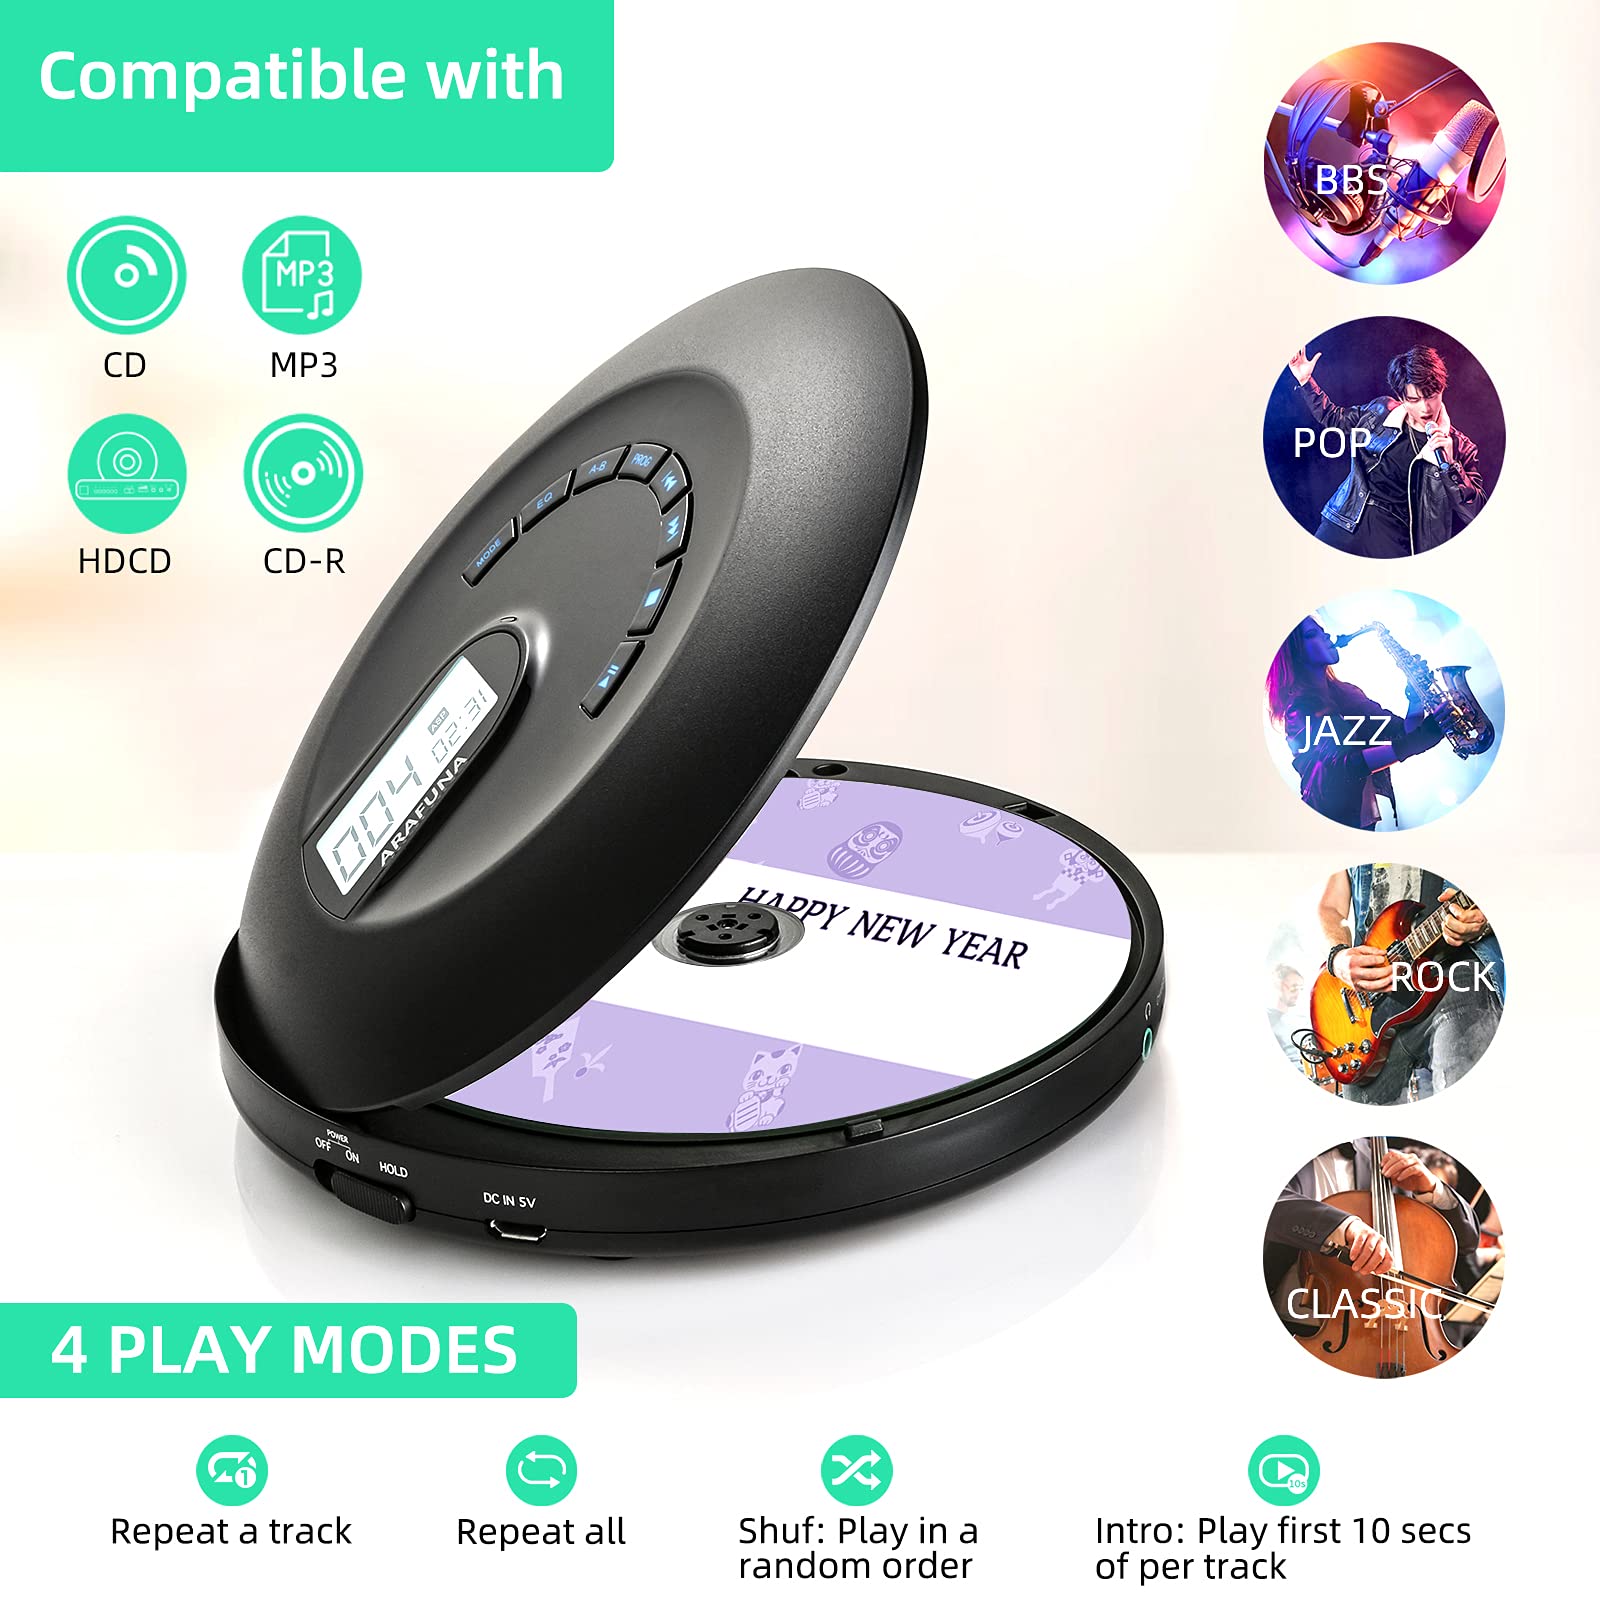 CD Player Portable, Rechargeable Portable CD Player for Car and Travel, Walkman CD Player with Headphone and Anti-Skip/Shockproof, Personal CD Player with LCD Display, AUX Cable, Backlight (Black)